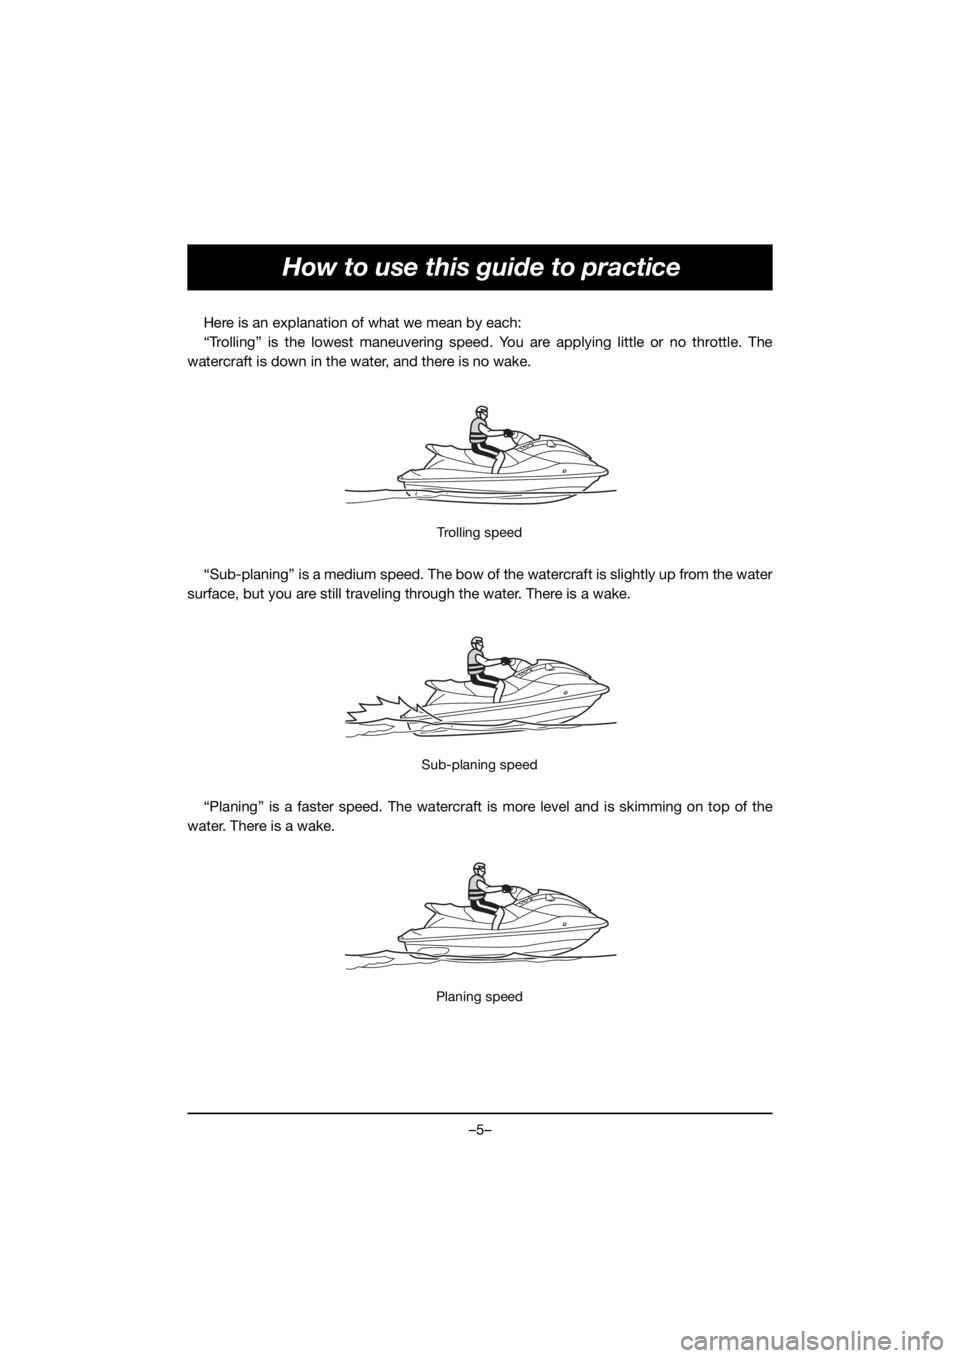 YAMAHA VX DELUXE 2021  Owners Manual –5–
How to use this guide to practice
Here is an explanation of what we mean by each:
“Trolling” is the lowest maneuvering speed. You are applying little or no throttle. The
watercraft is down